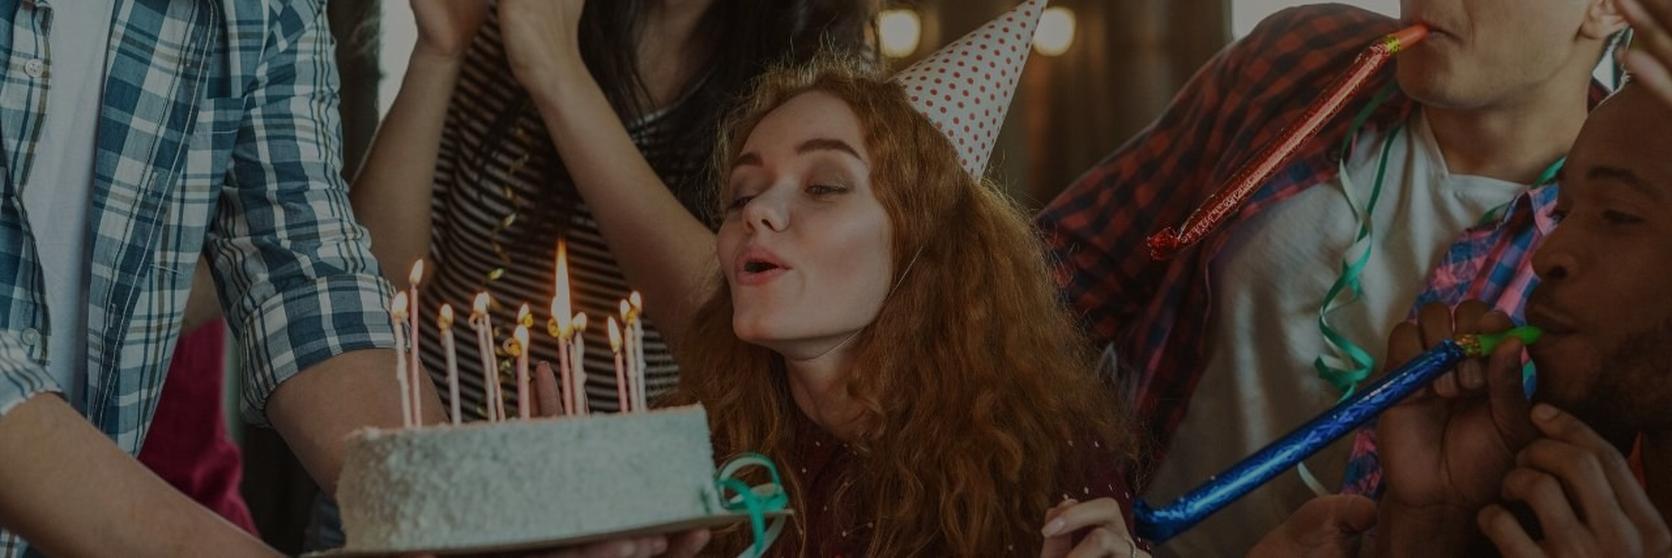 woman-blowing-candles-on-a-cake-out